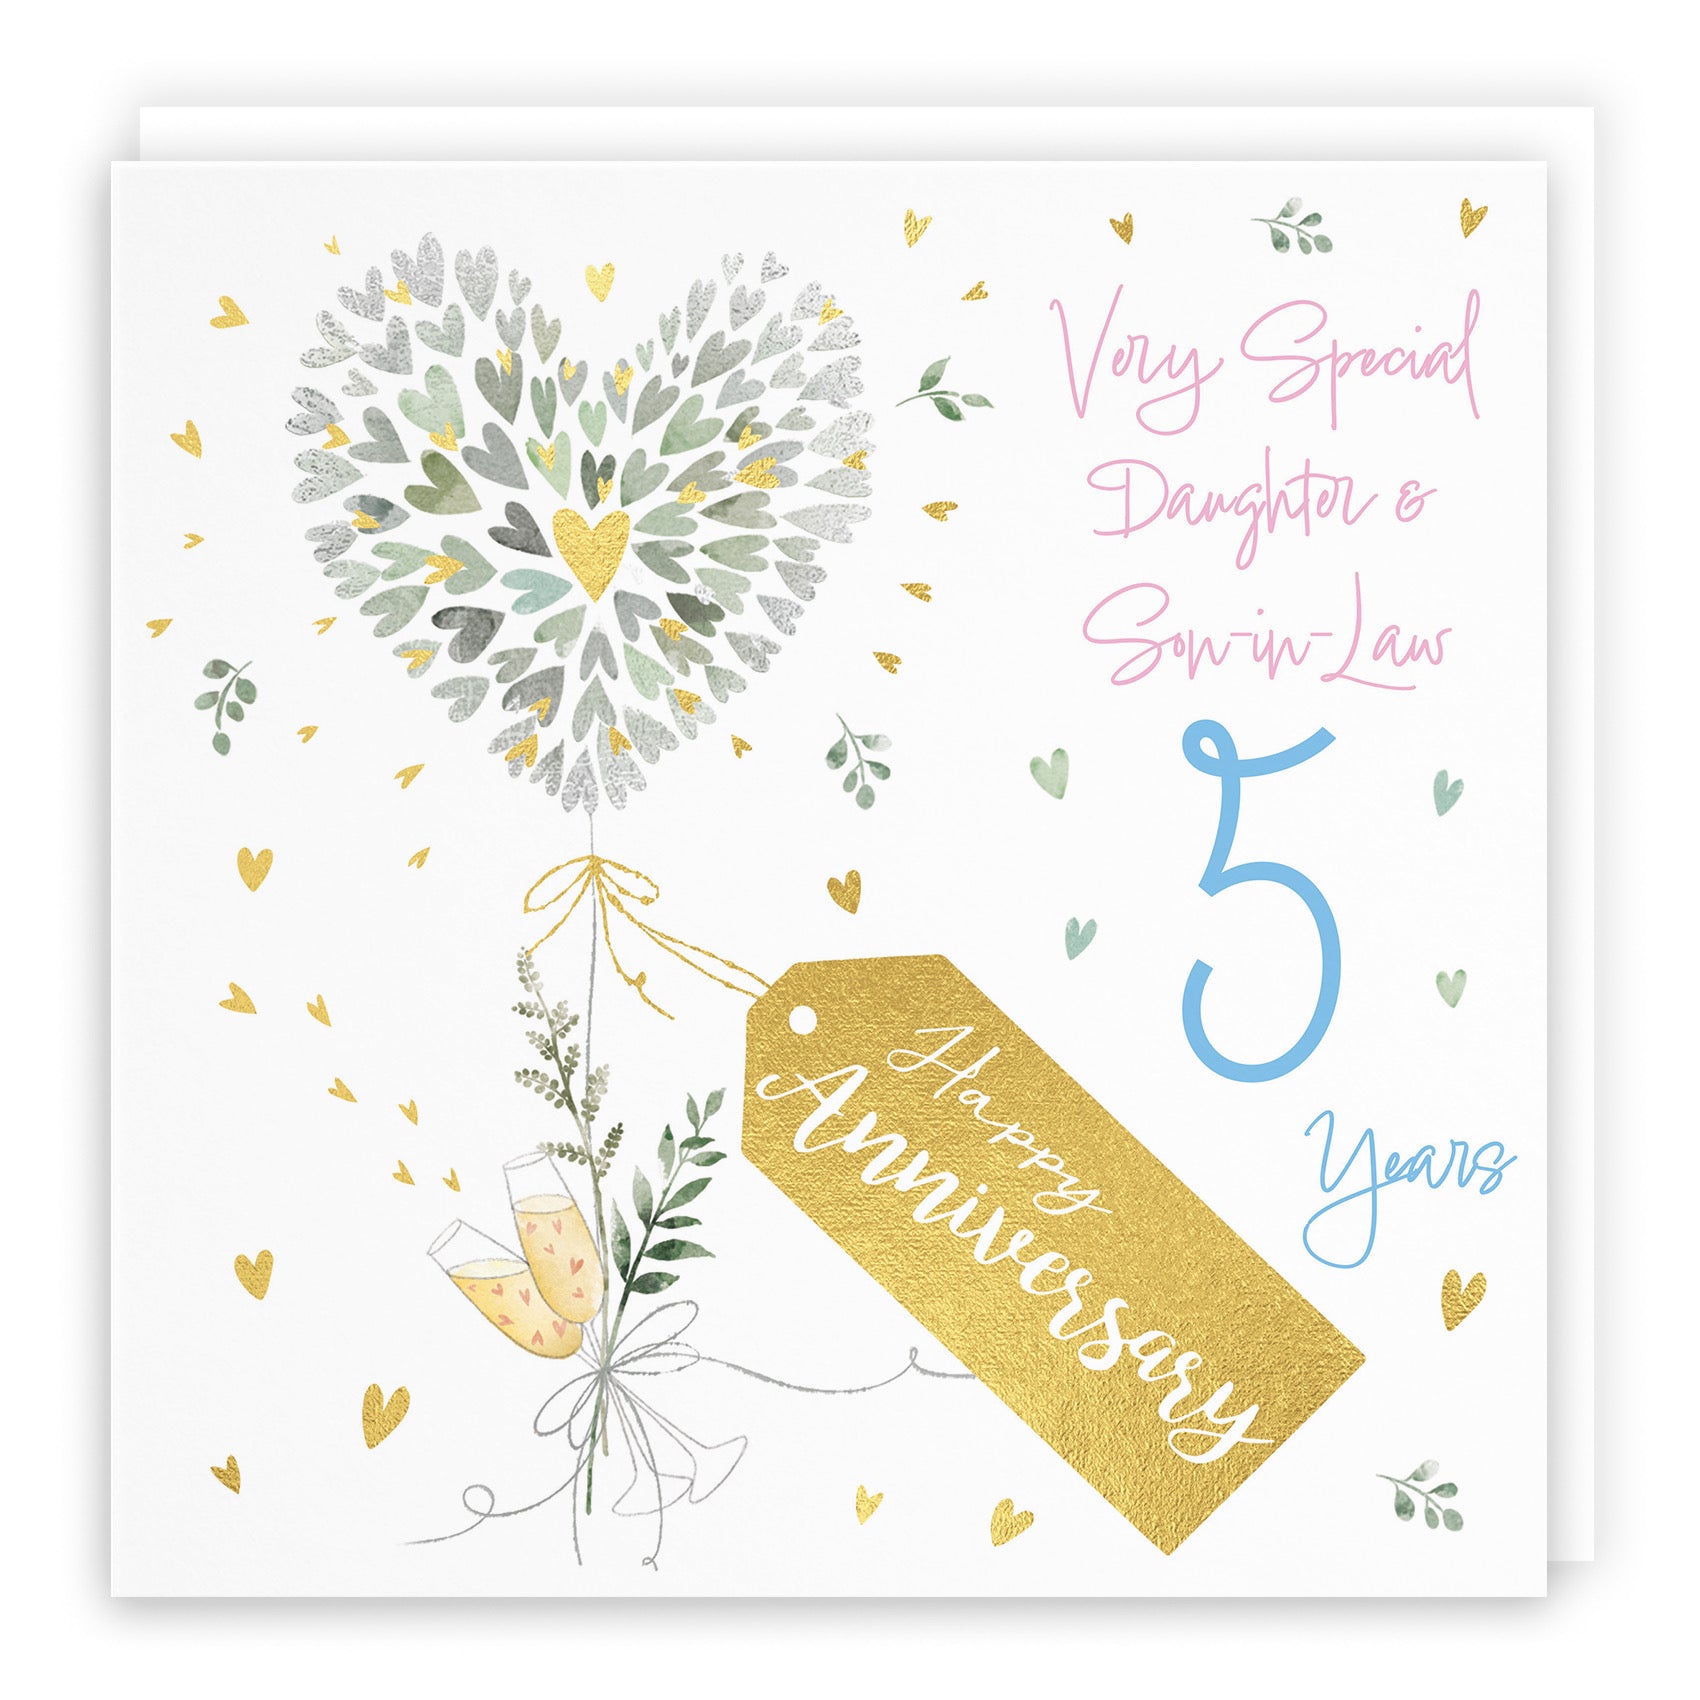 Daughter And Son-in-Law 5th Anniversary Card Contemporary Hearts Milo's Gallery - Default Title (B0CKJ85DKW)